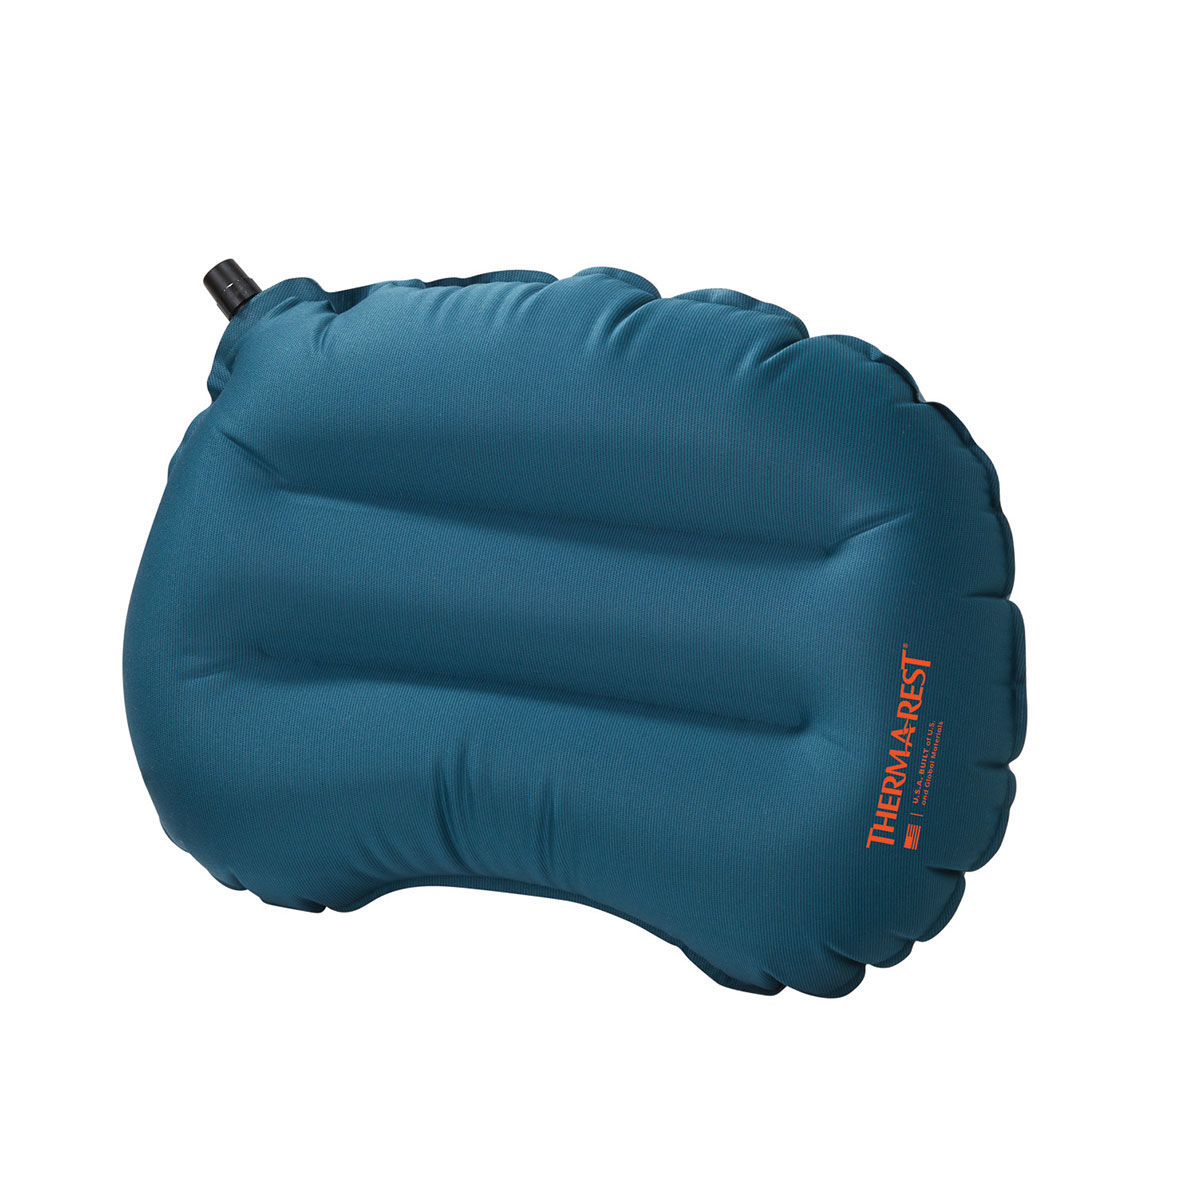 Oreiller gonflable ultraléger Air Head Lite Thermarest